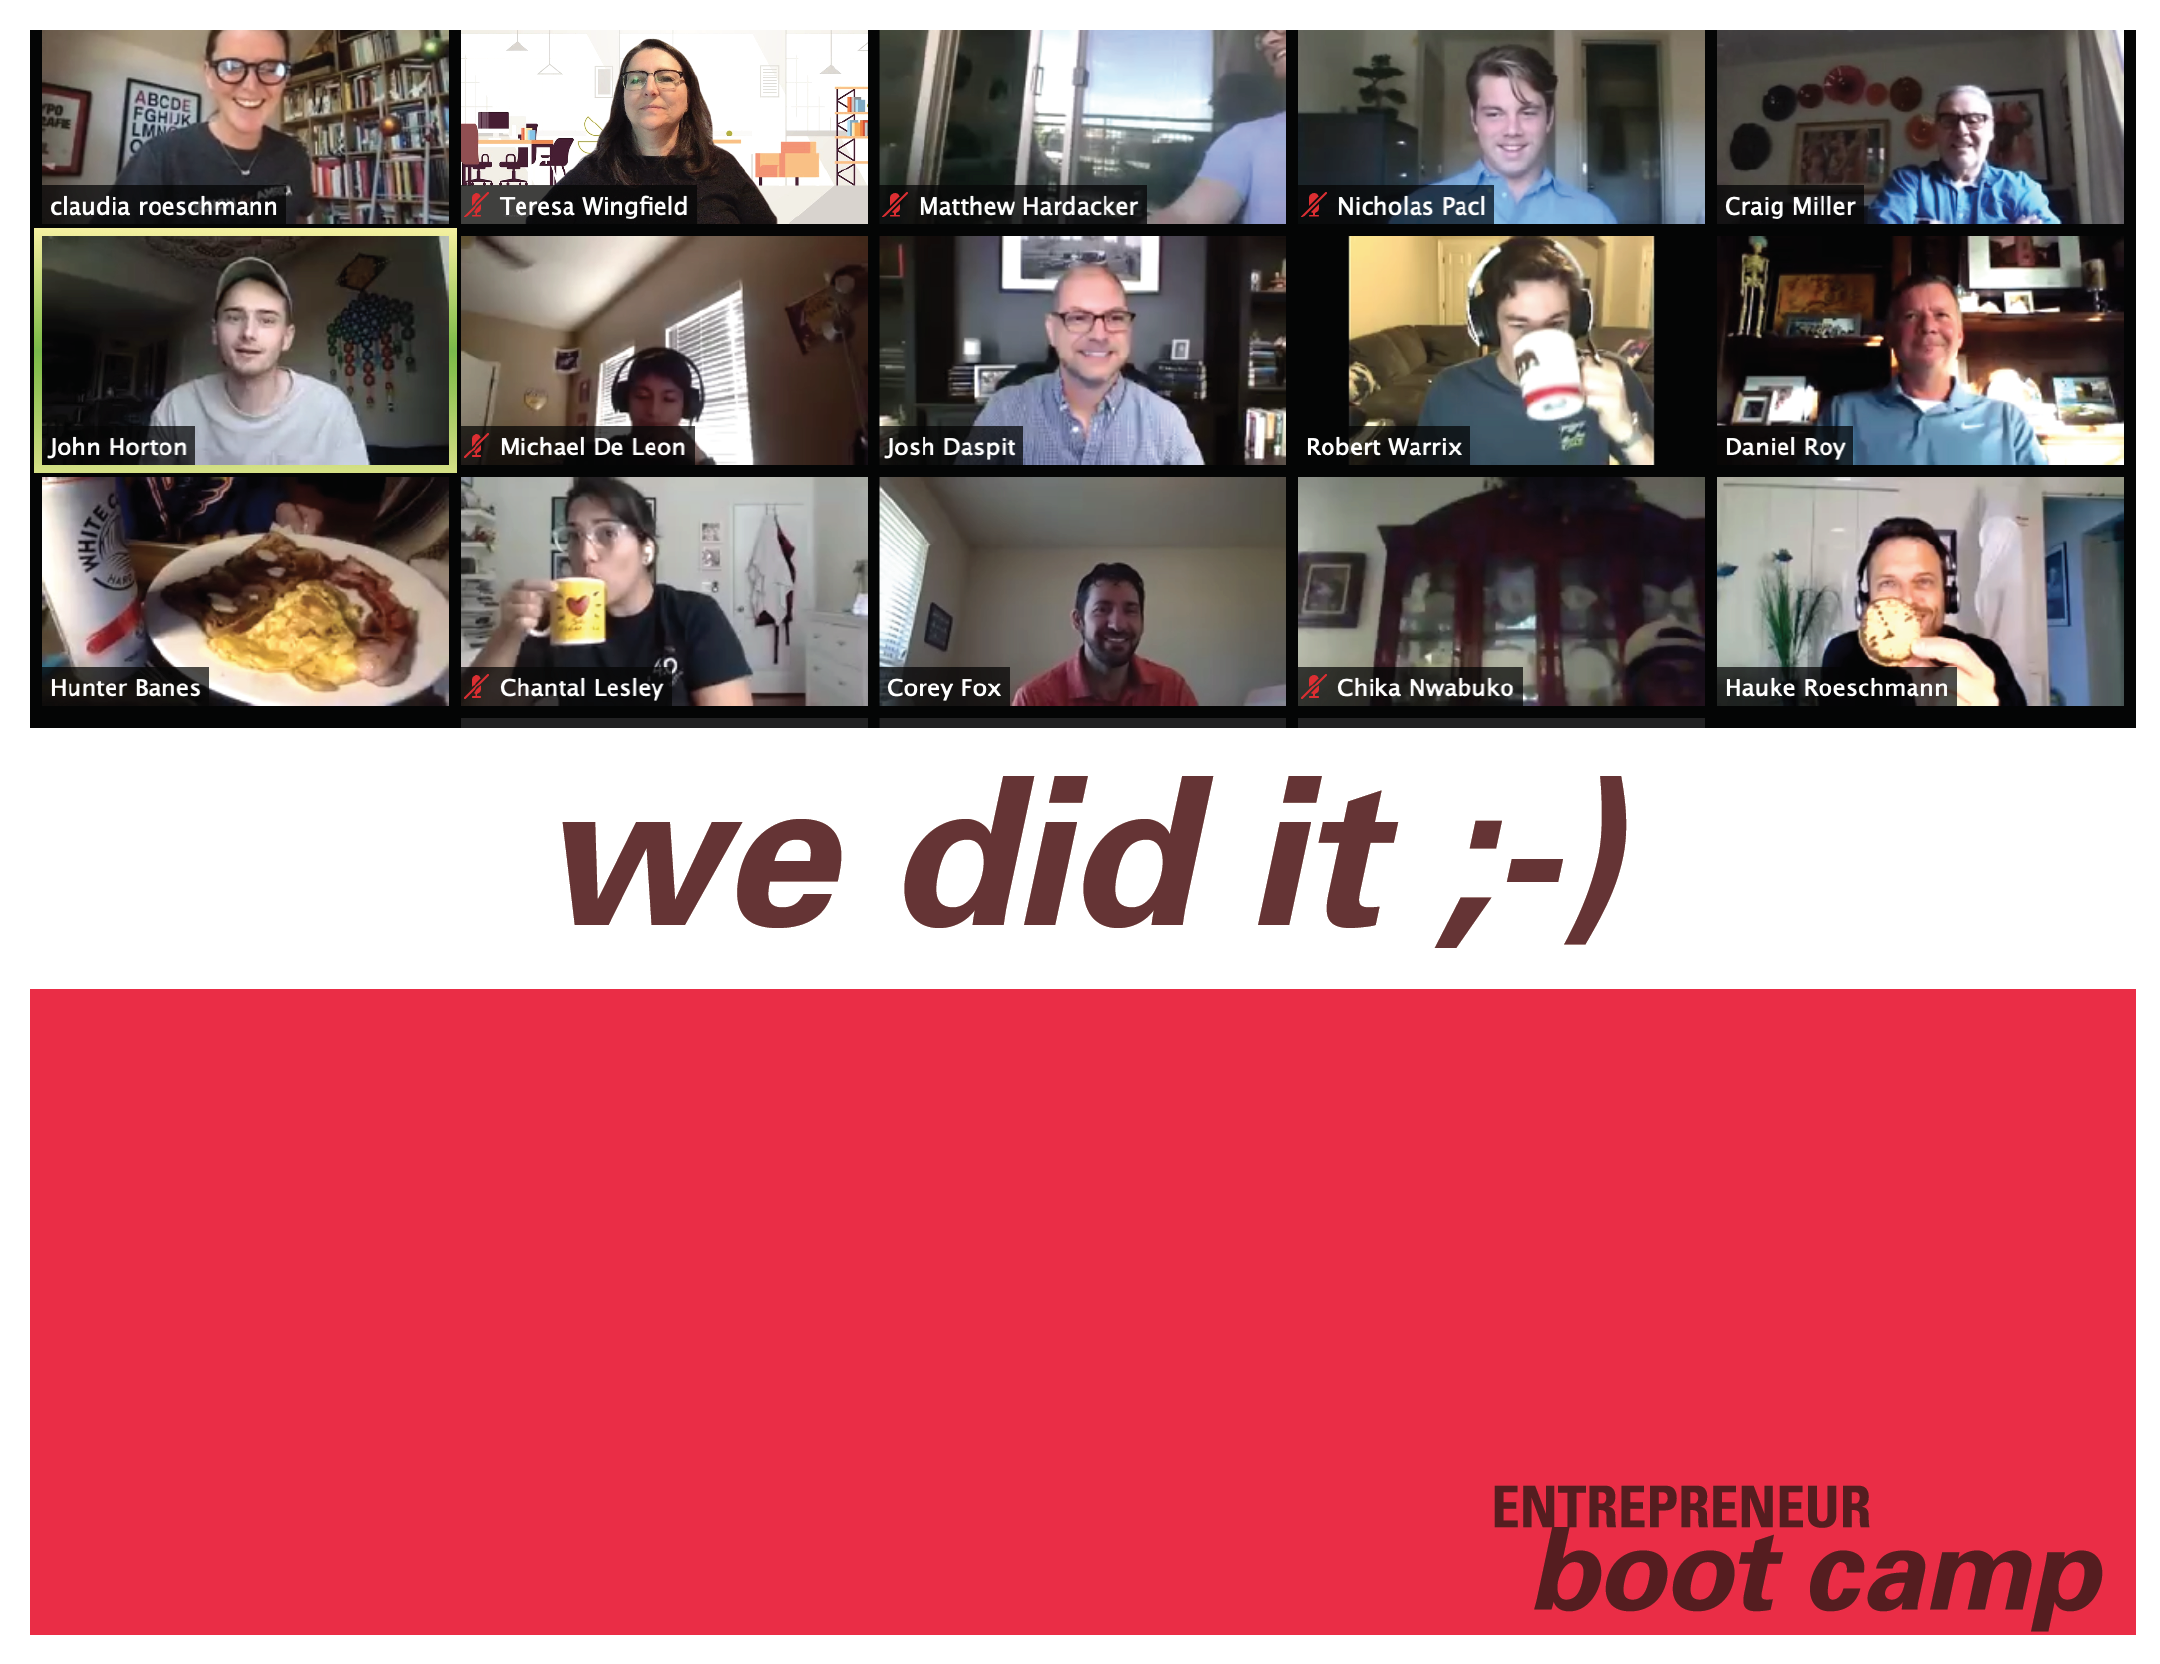 Photo of Zoom participants with caption "we did it"